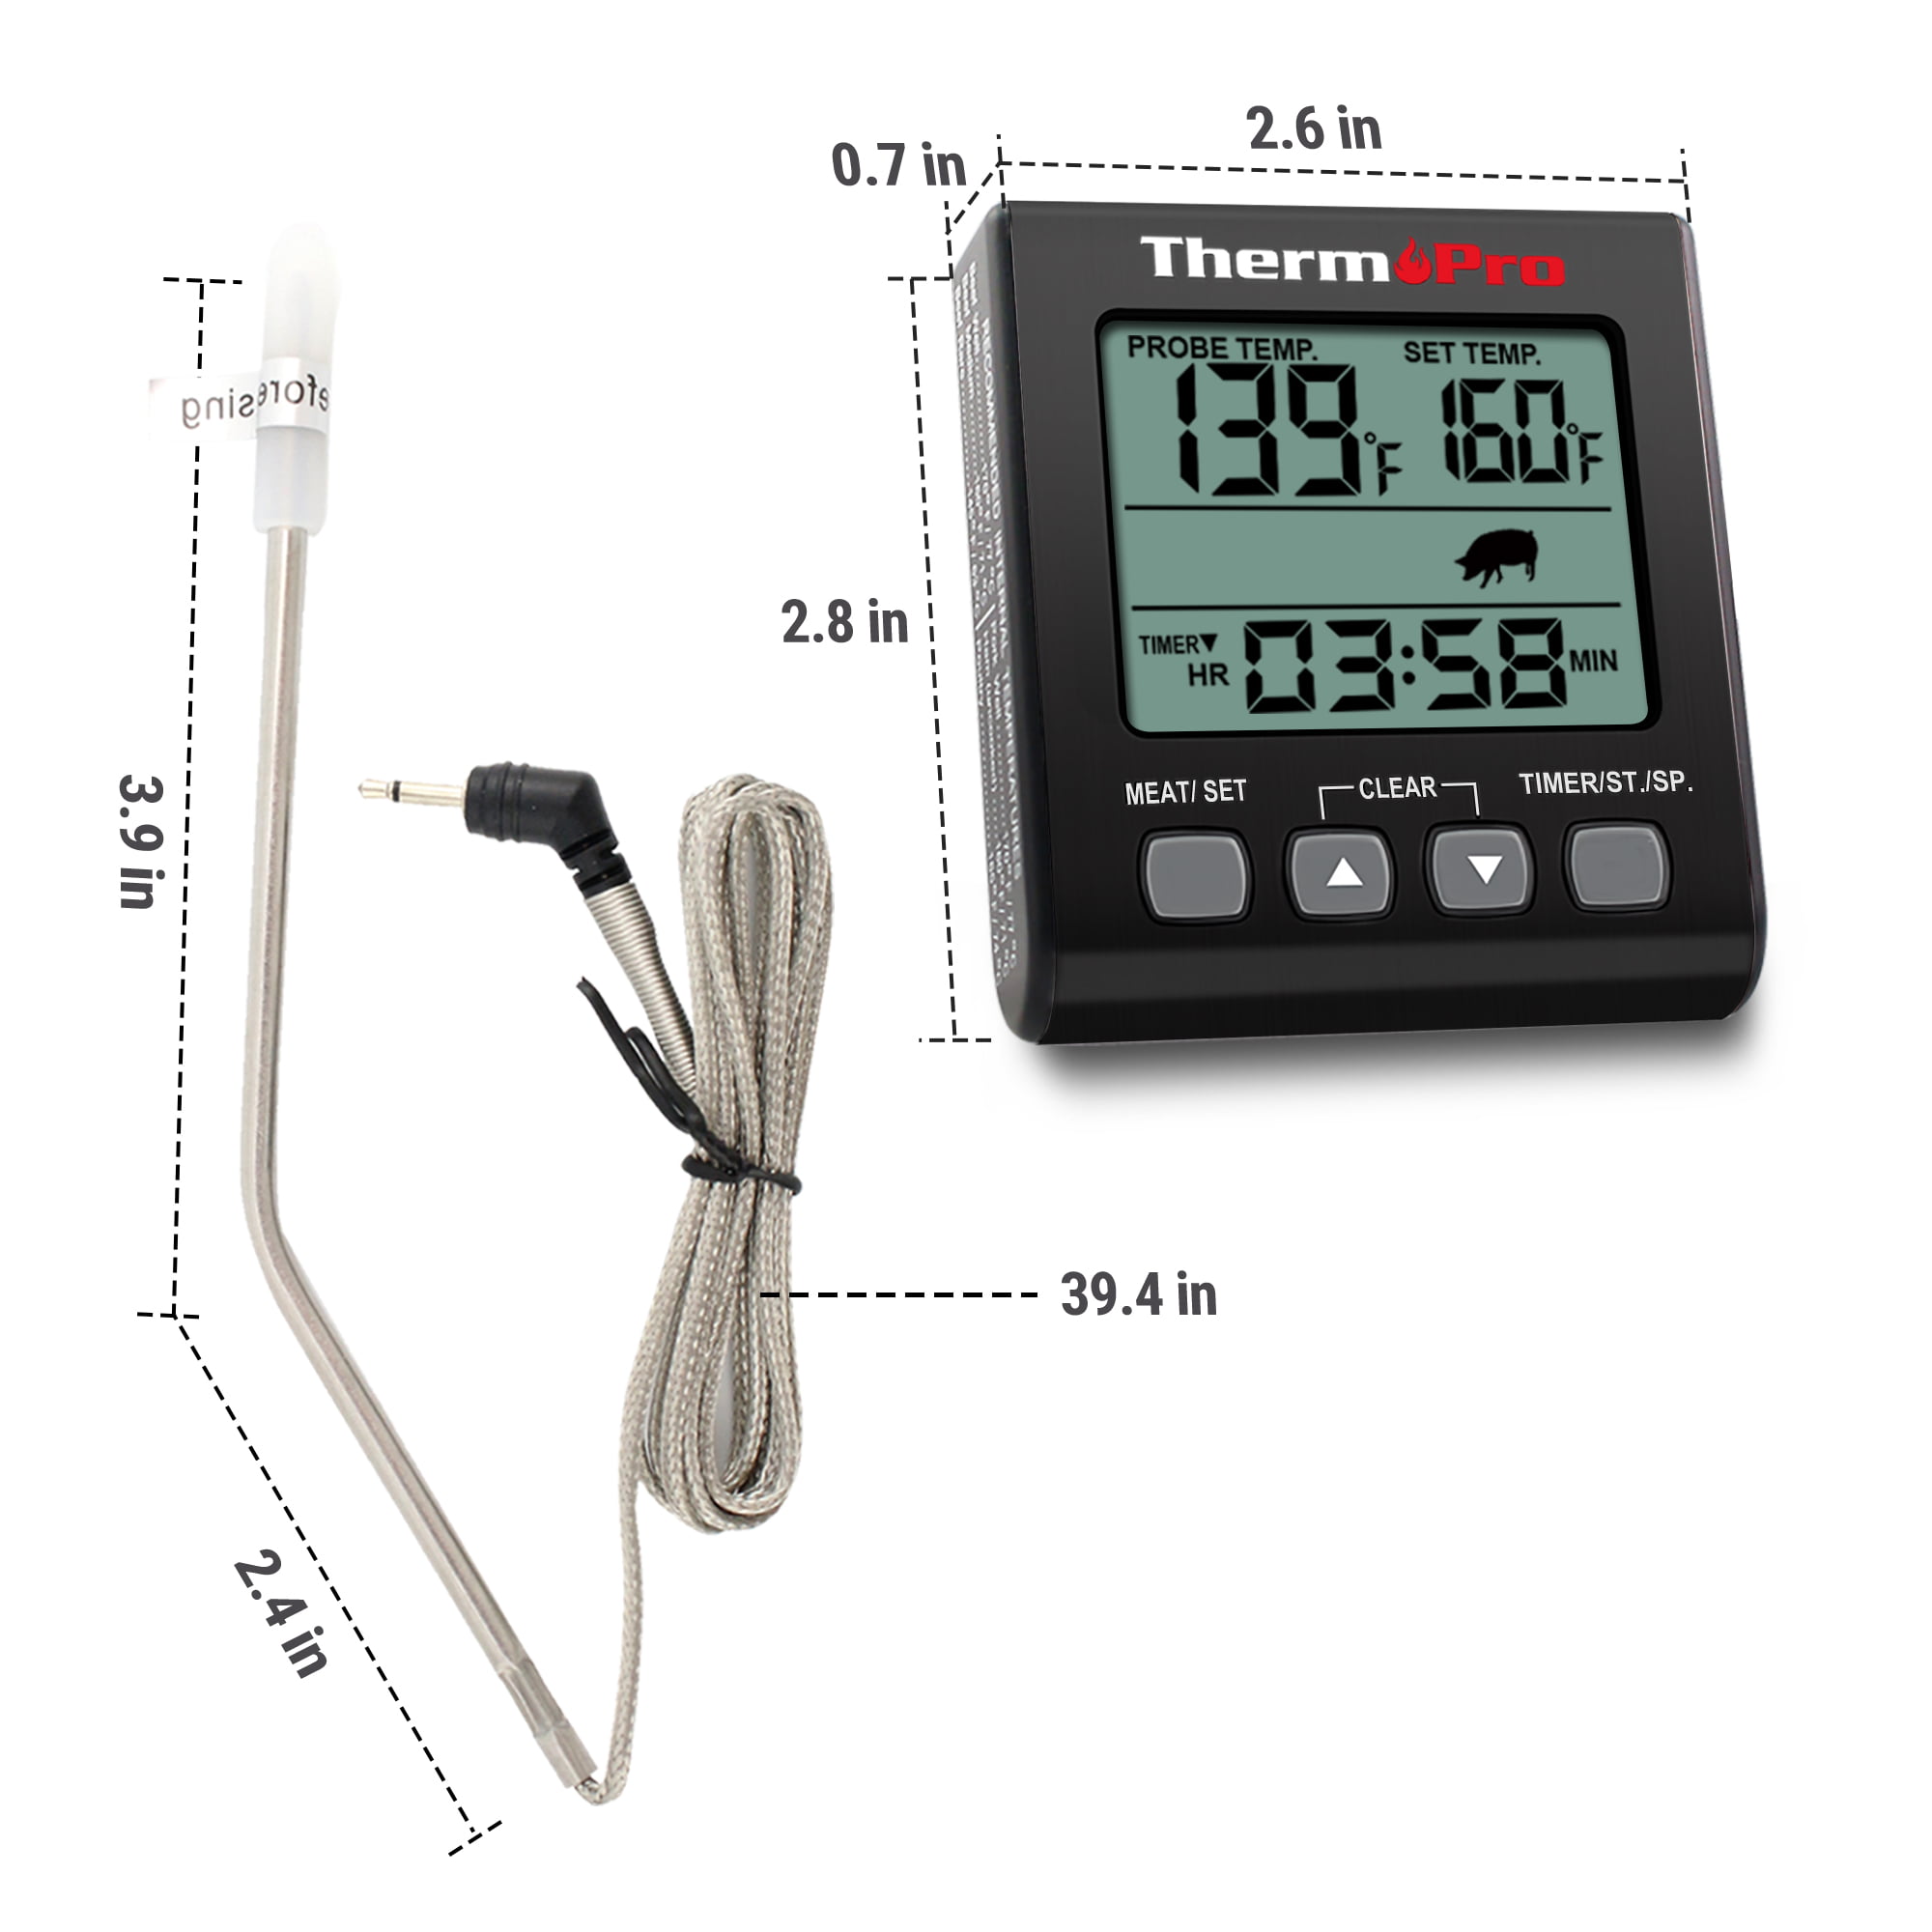 Thermopro Tp07sw Remote Meat Thermometer Digital Grill Smoker Bbq